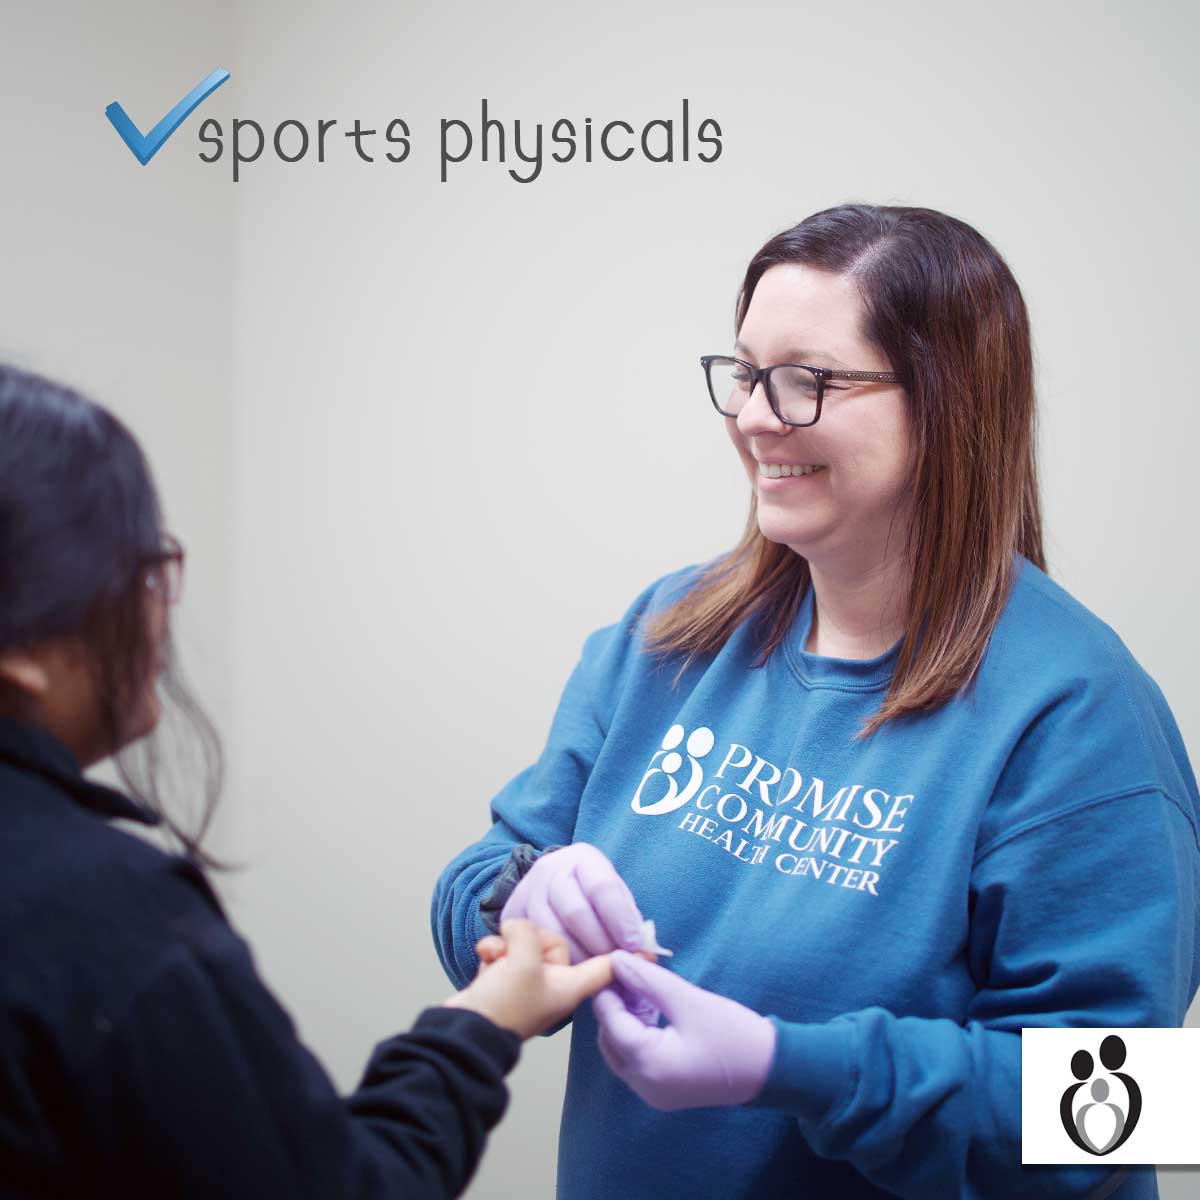 Make your school, sports and athletic physical appointments now at Promise Community Health Center.